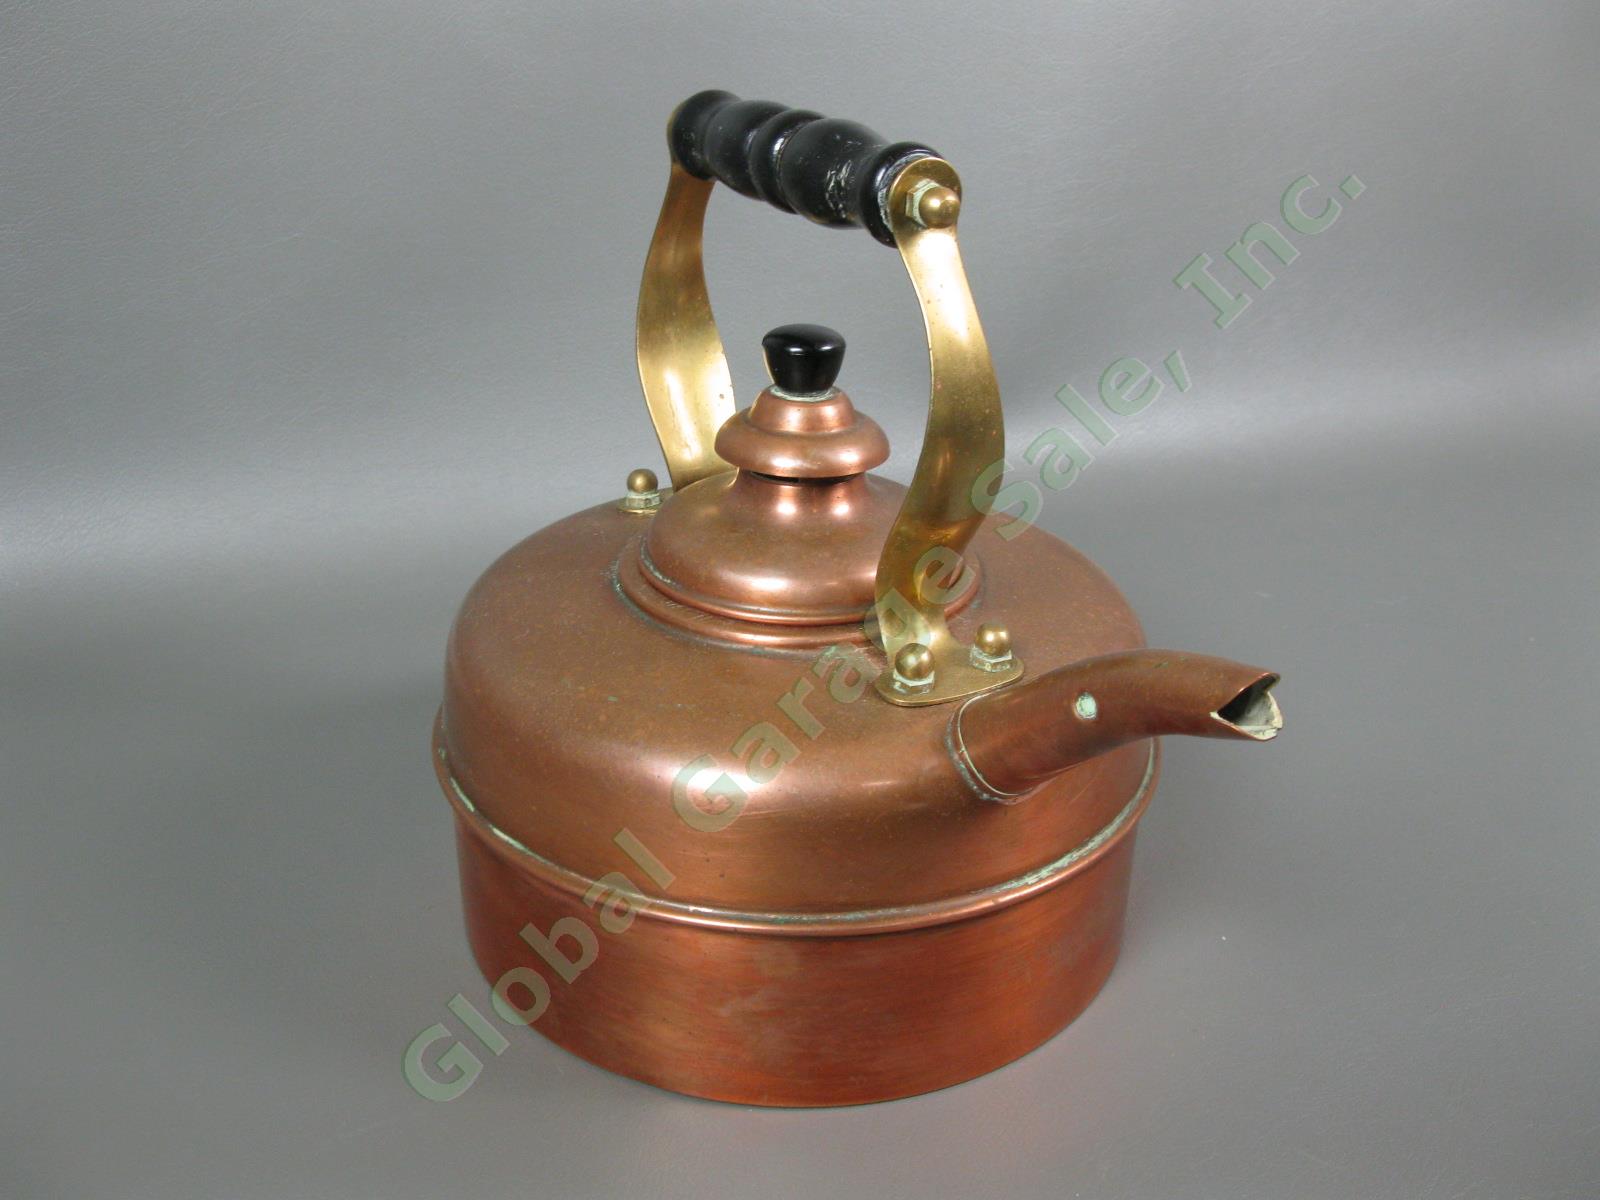 Vintage Simplex Patent Solid Copper Whistling Water Tea Kettle England 400709 NR 2